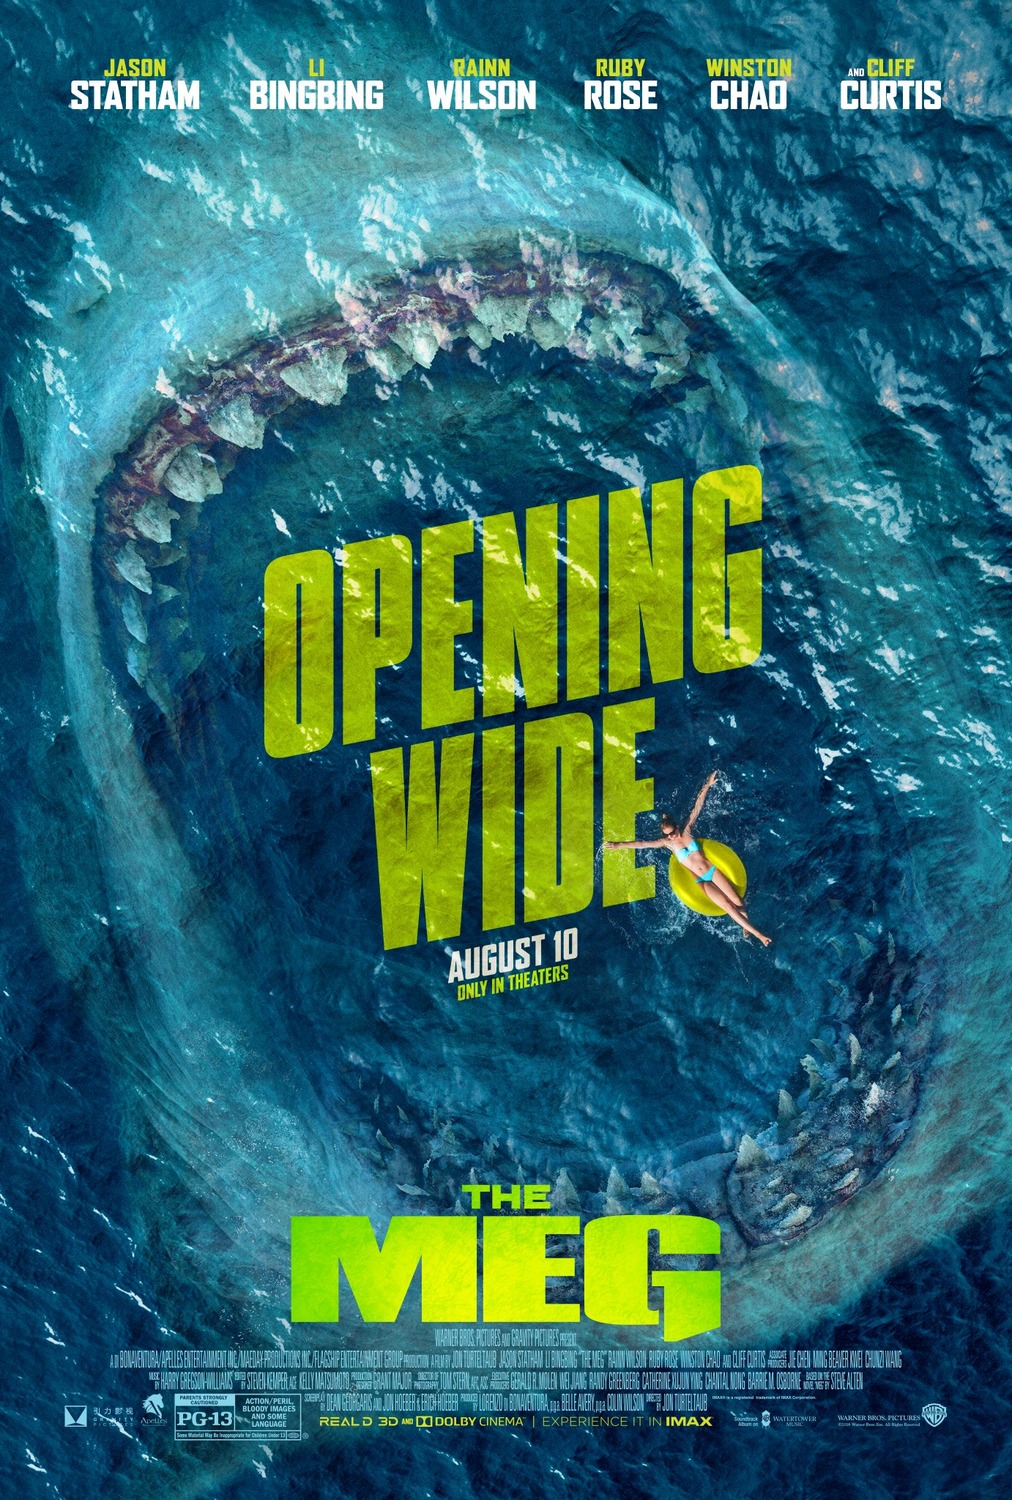 Extra Large Movie Poster Image for The Meg (#6 of 26)